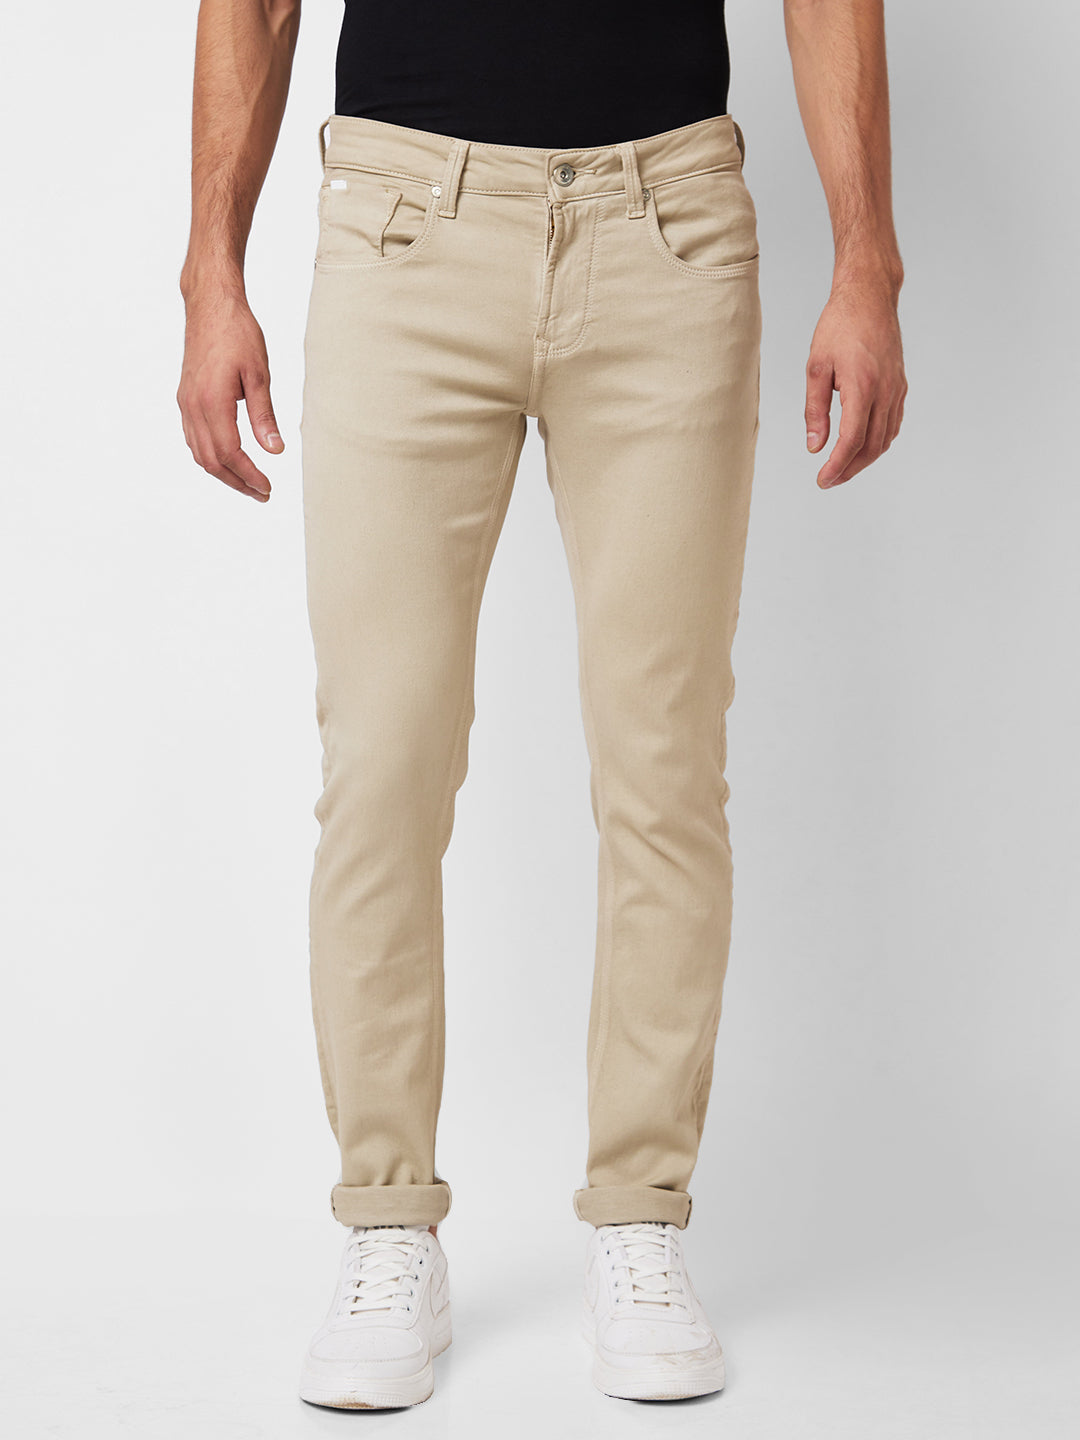 Men's Sateen Pants Collection | Lucky Brand